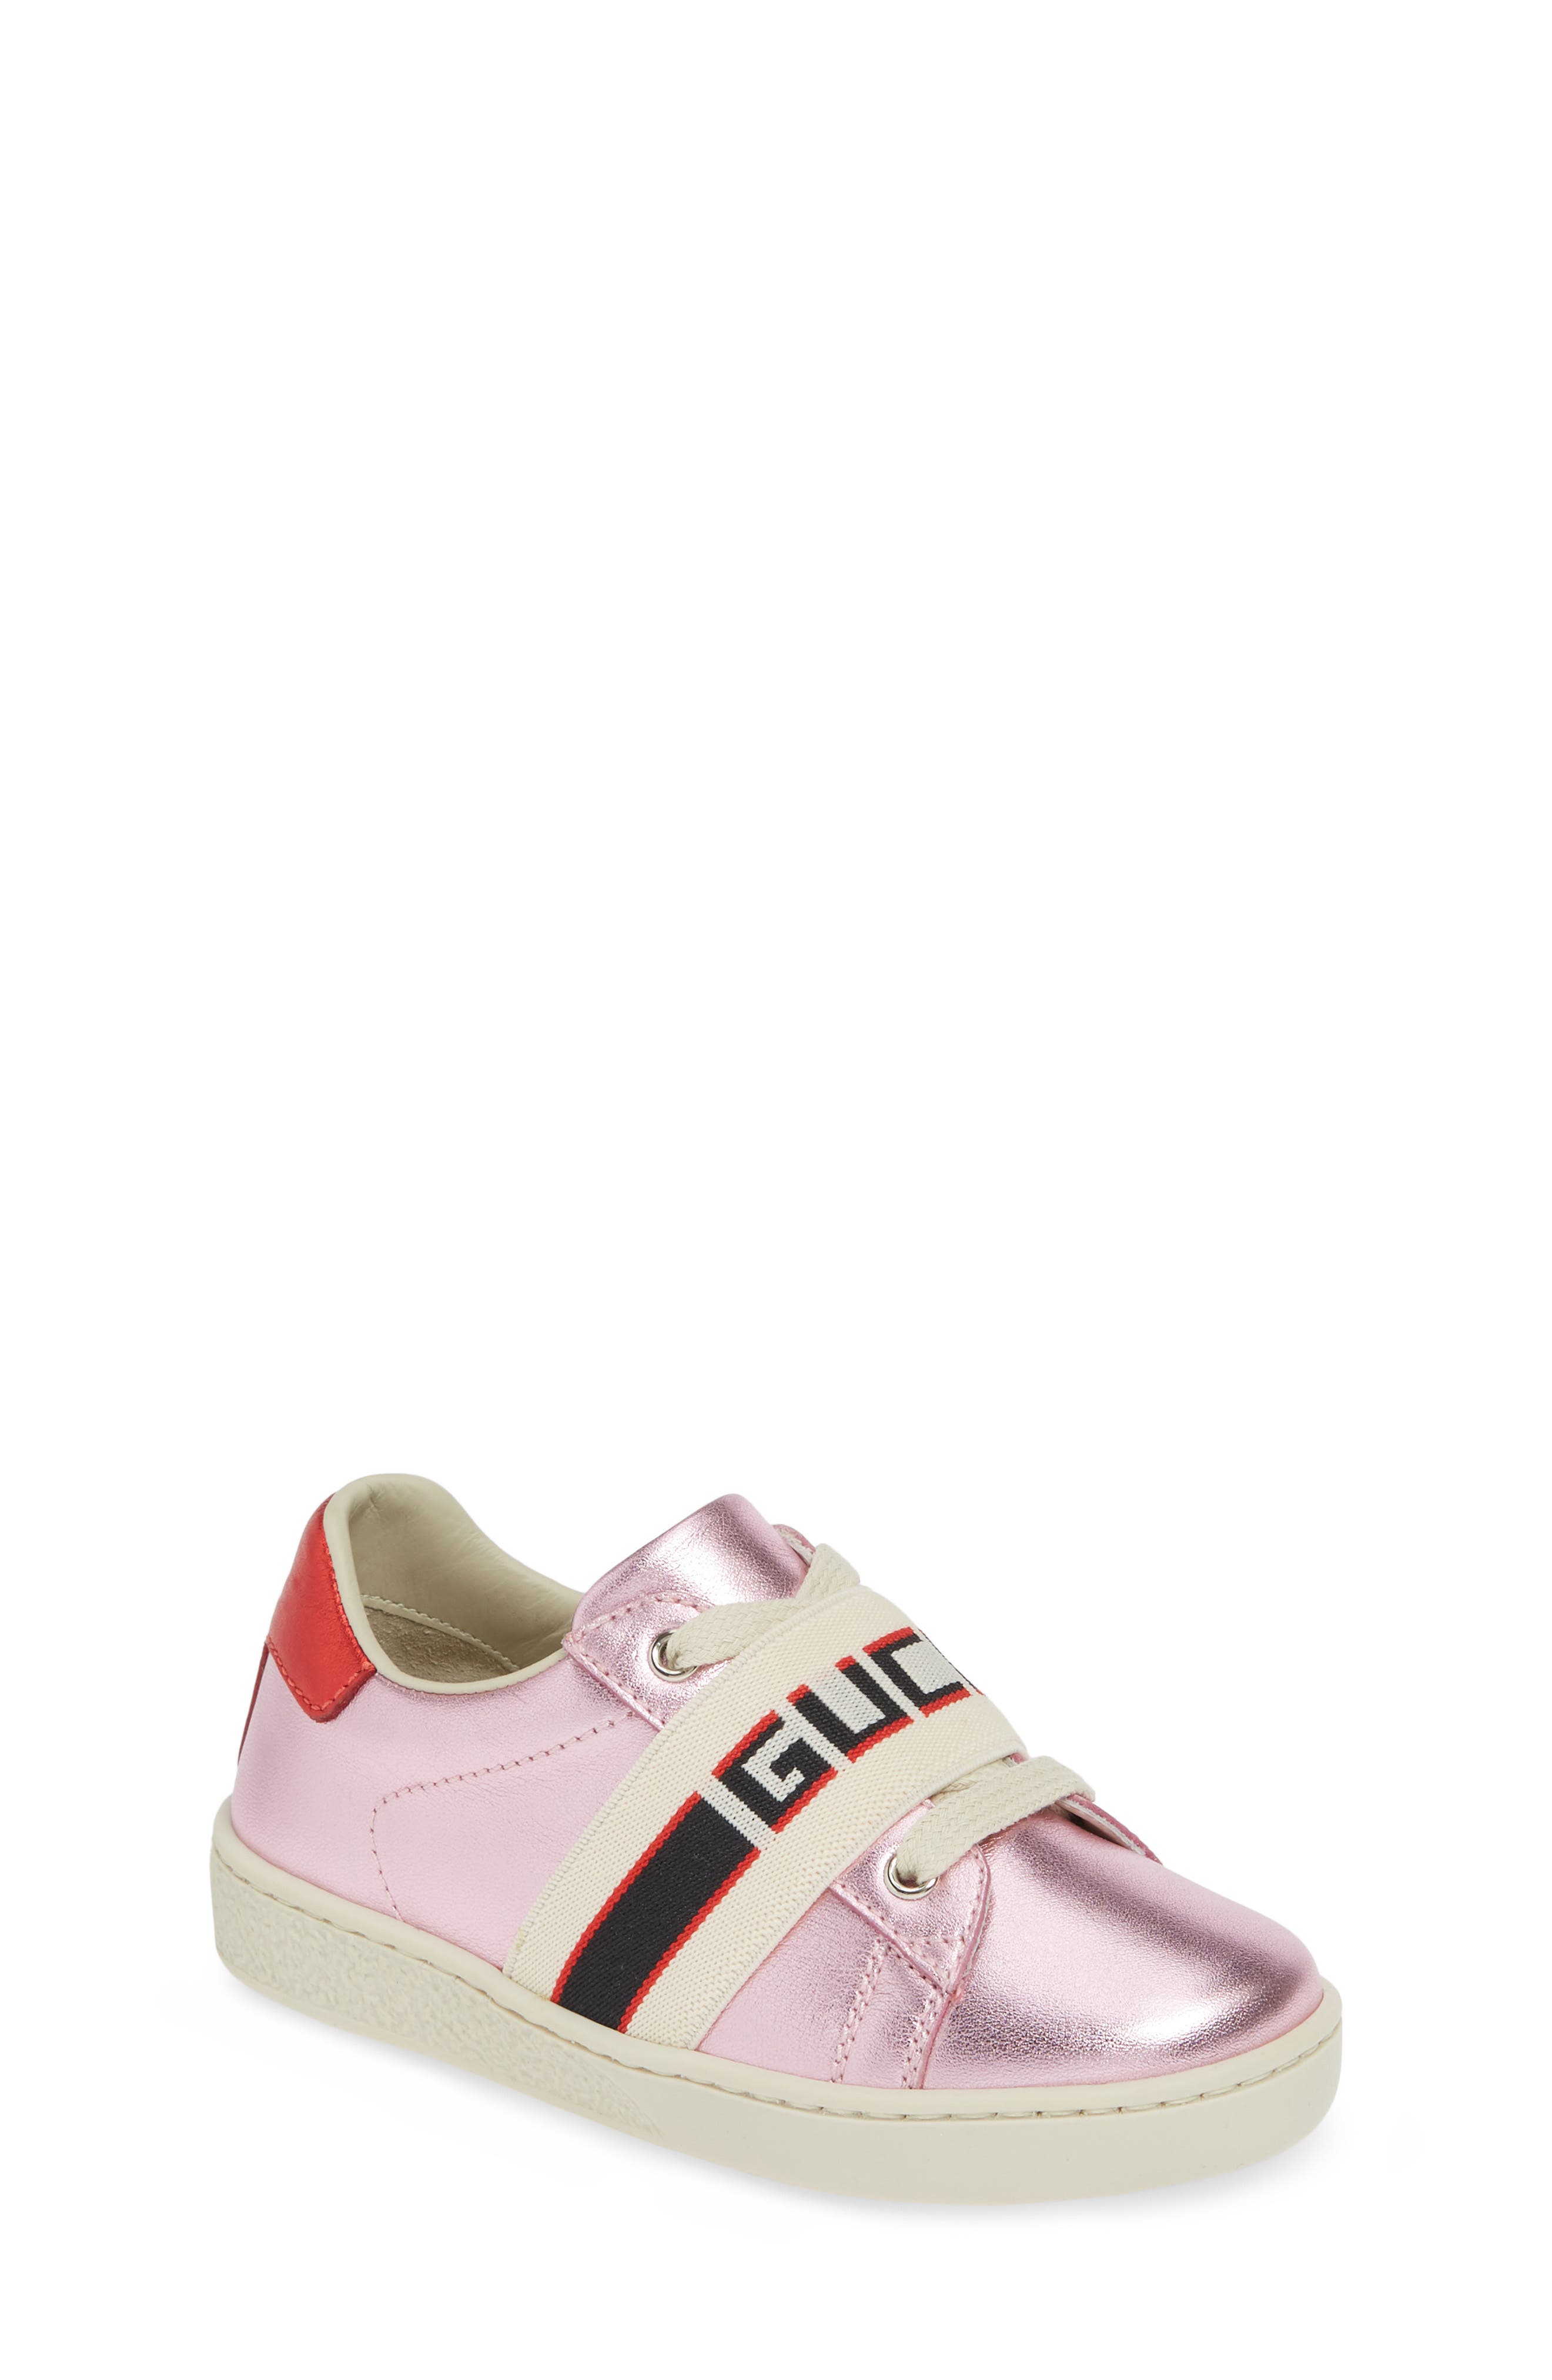 gucci shoes for teens